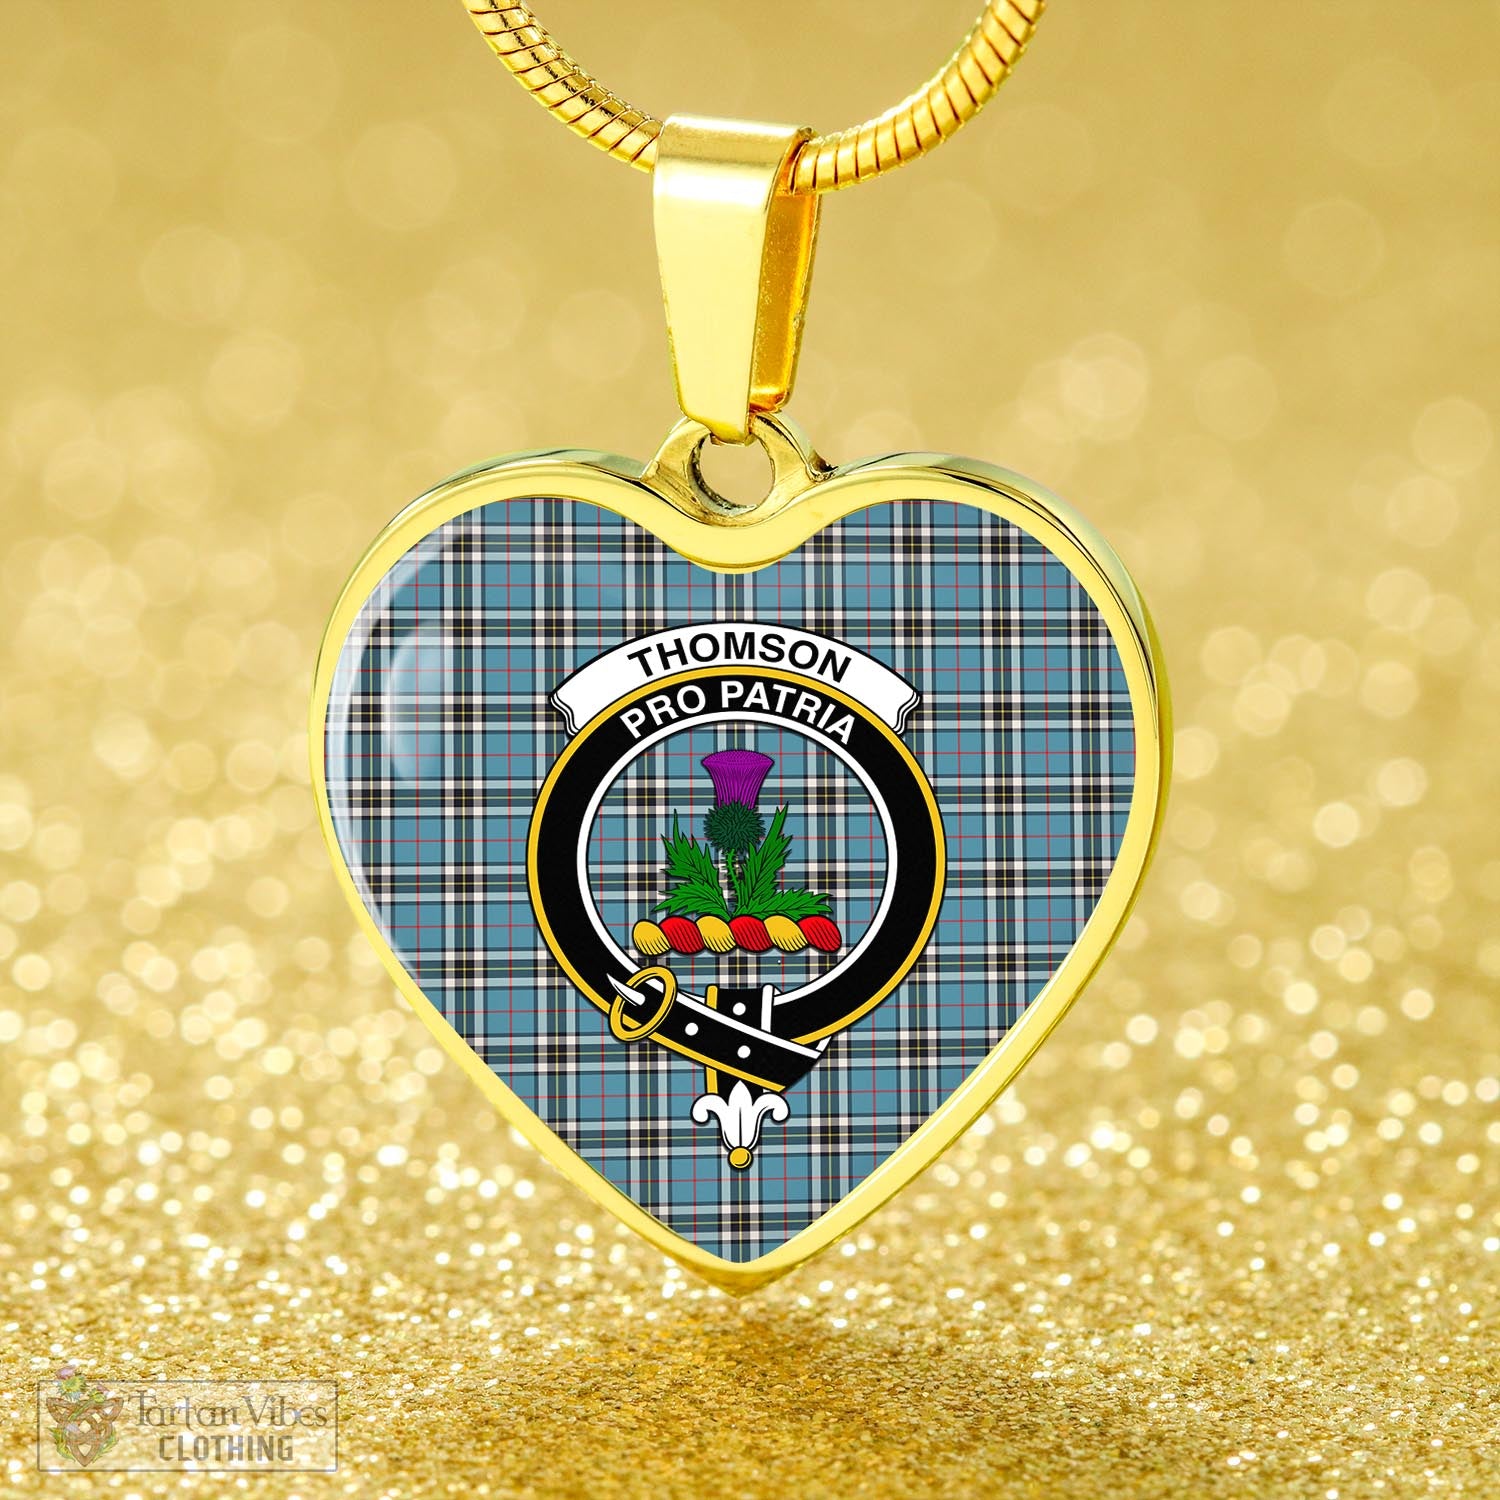 Tartan Vibes Clothing Thomson Tartan Heart Necklace with Family Crest